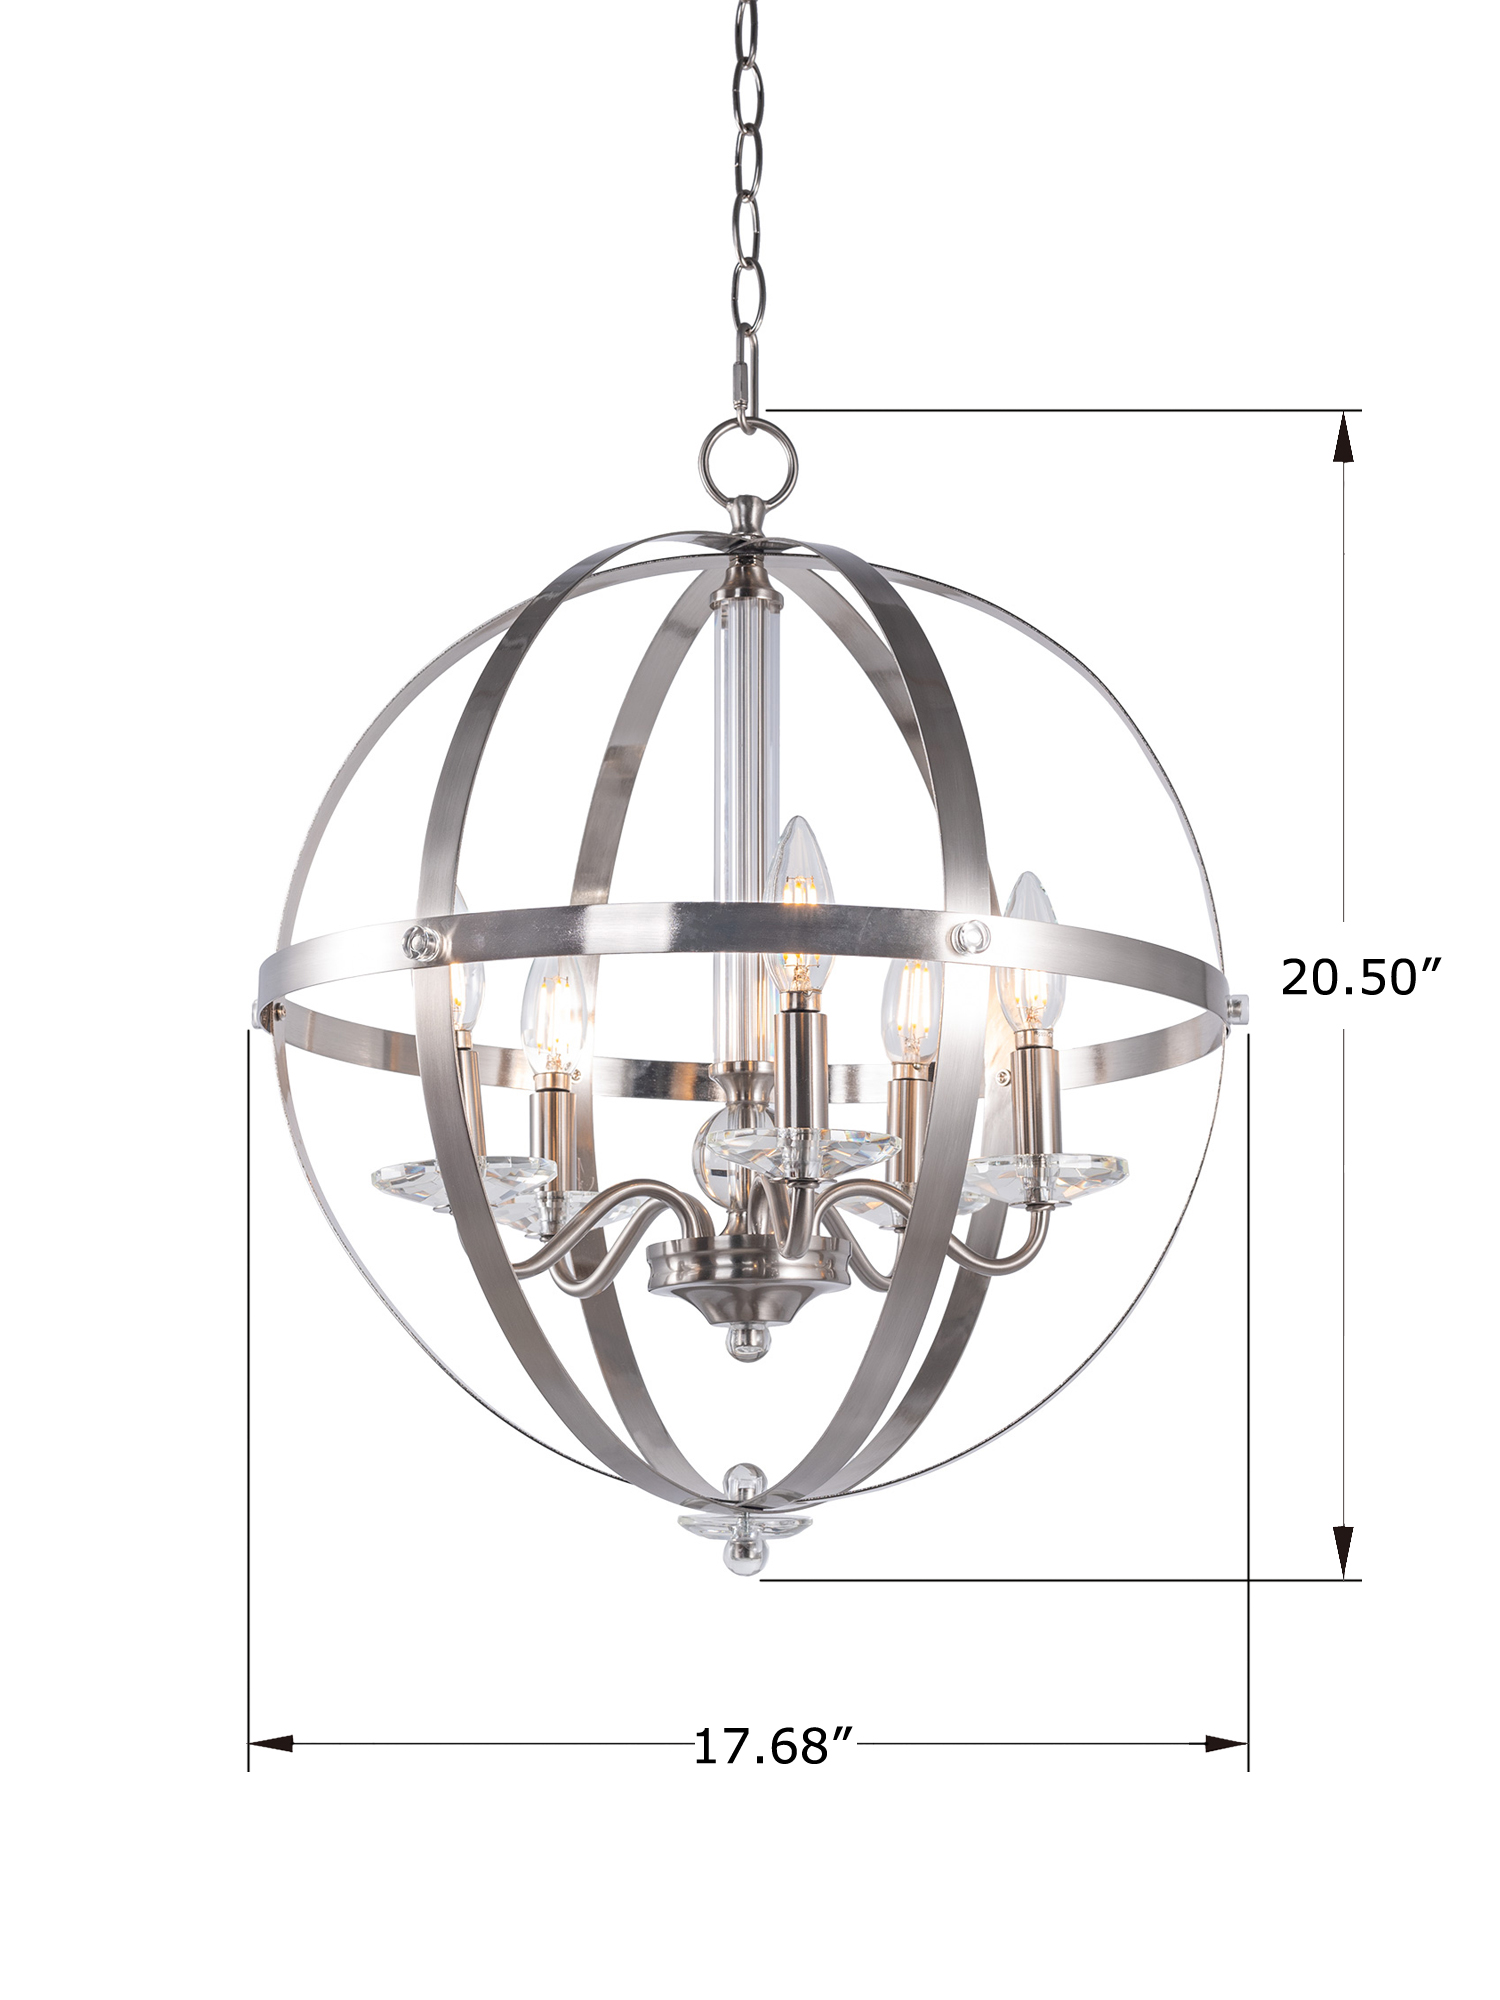 USA-Direct-5-Light-Candle-Style-Globe-Chandelier-Industrial-Rustic-Indoor-Pendant-Light-Without-Bulb-1877125-2